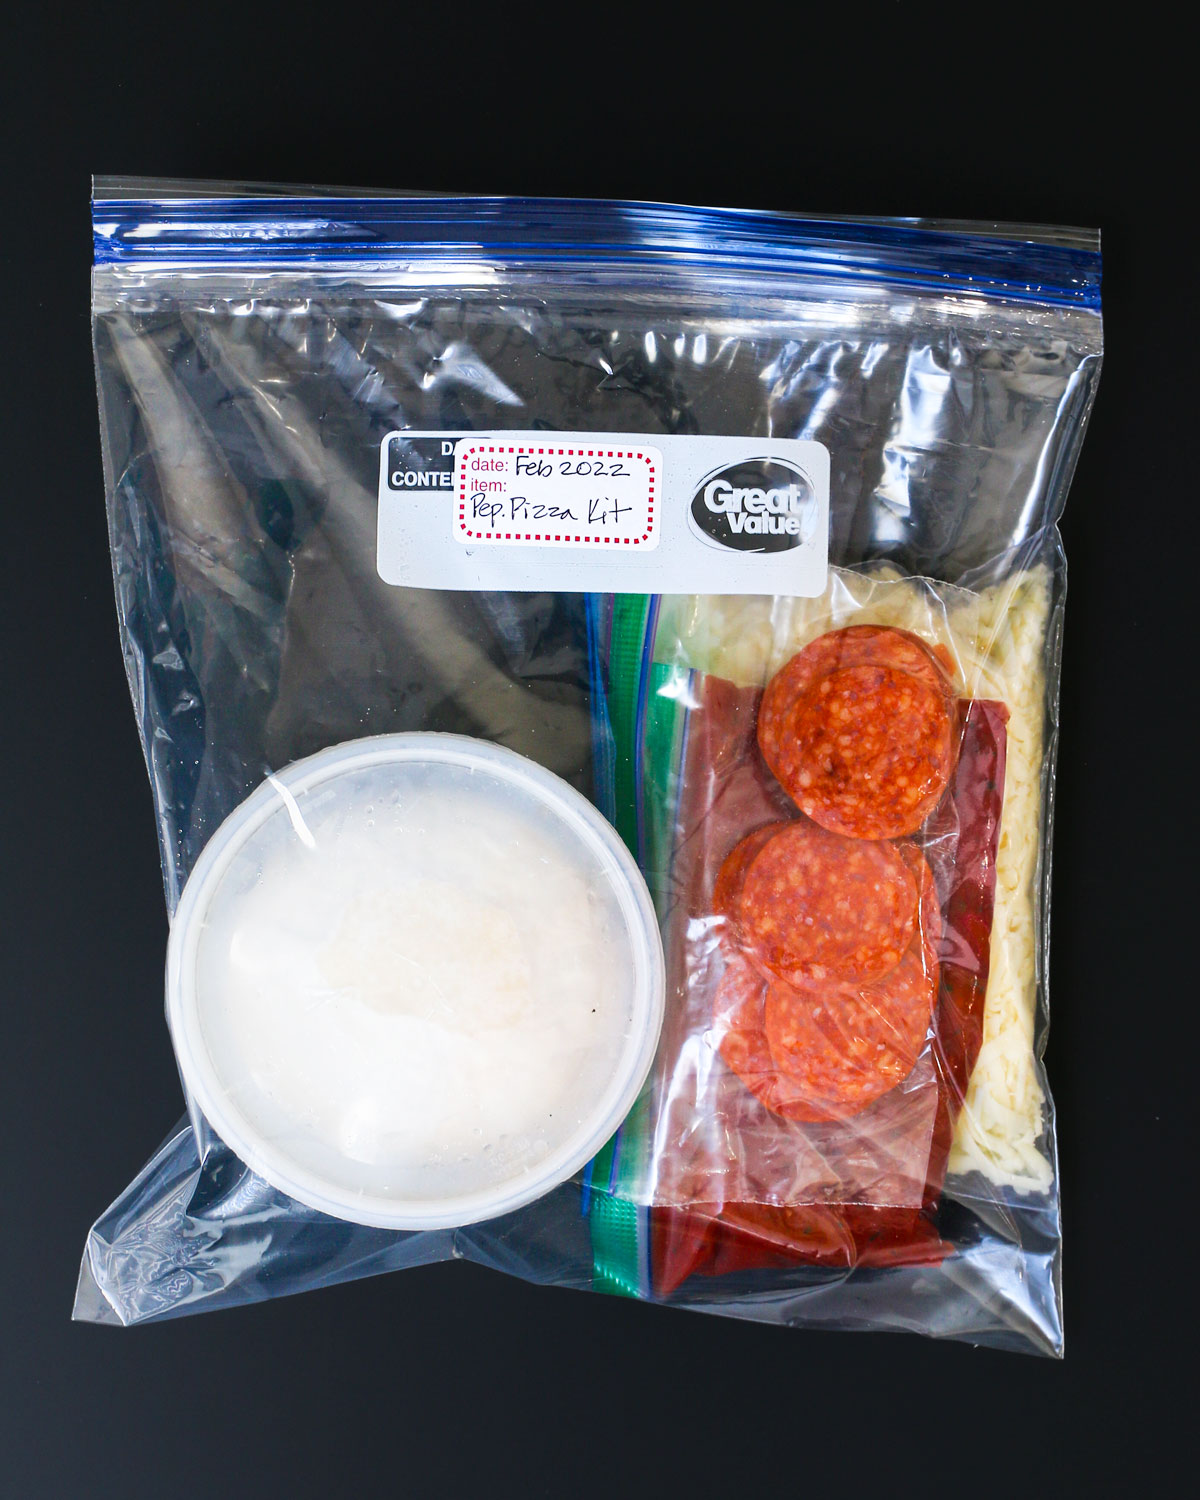 packaged freezer meal kit to make pizza.